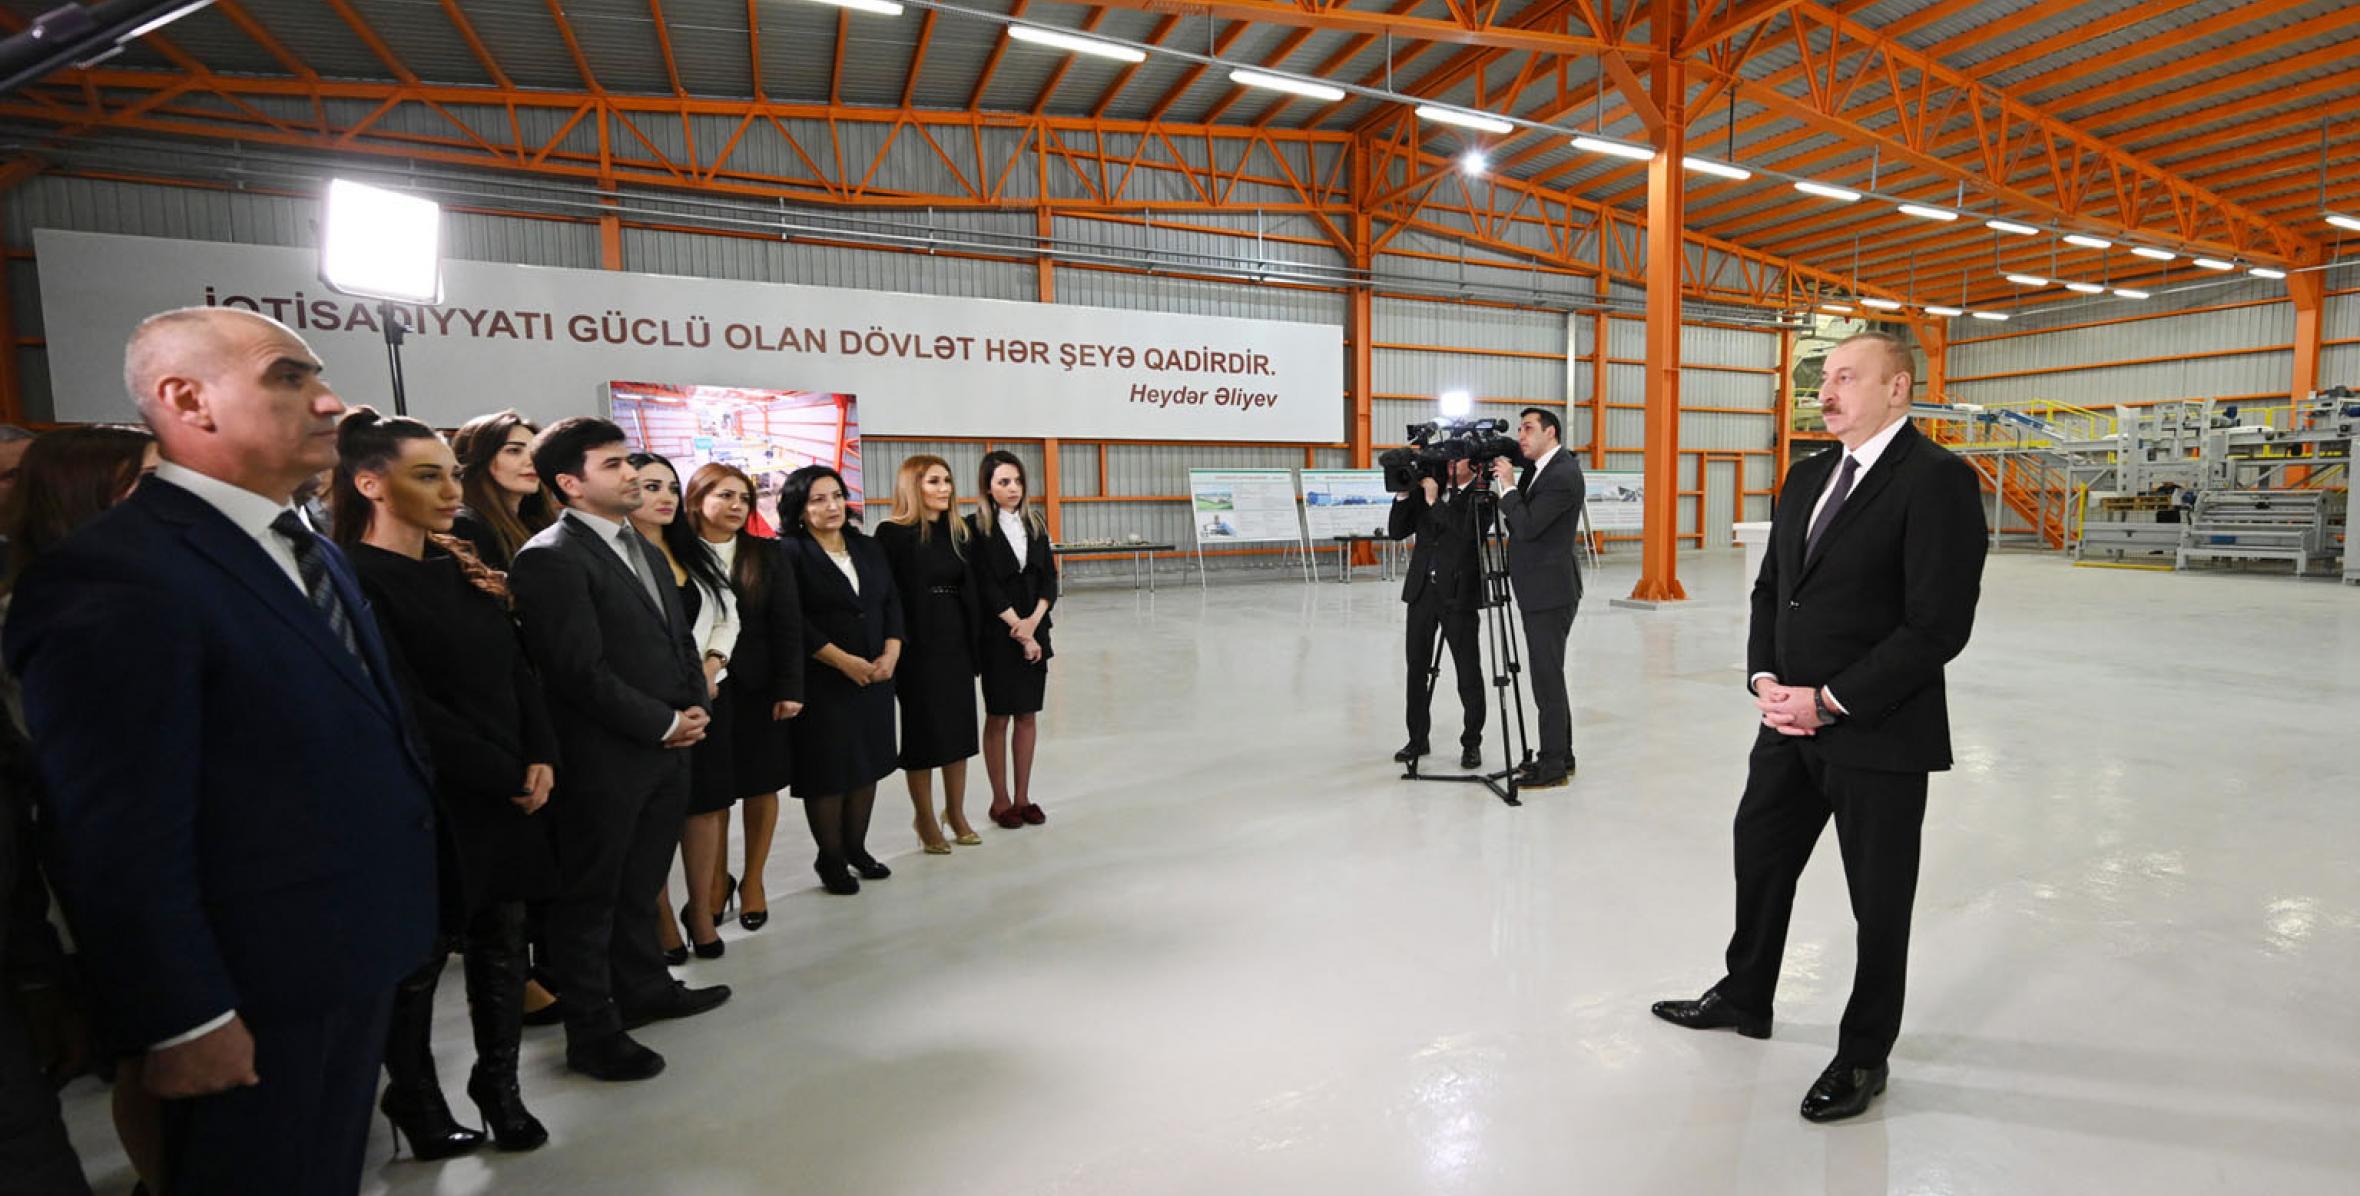 Speech by Ilham Aliyev at the opening of lime factory in Gazakh